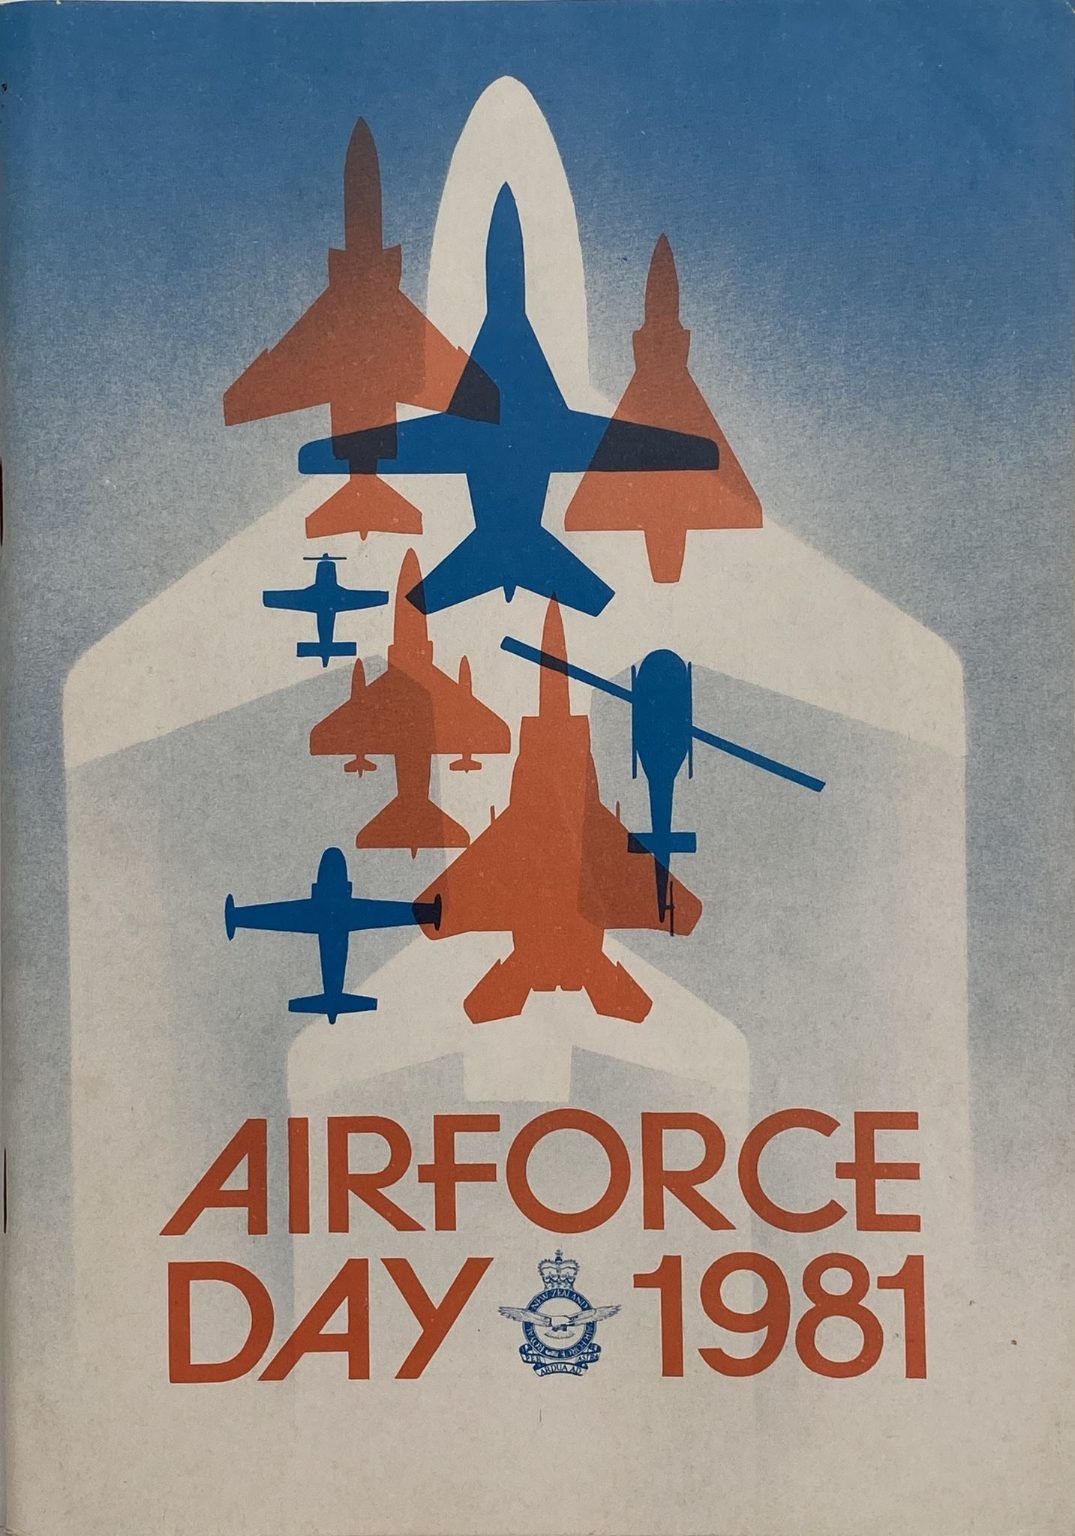 AIRFORCE DAY 1981